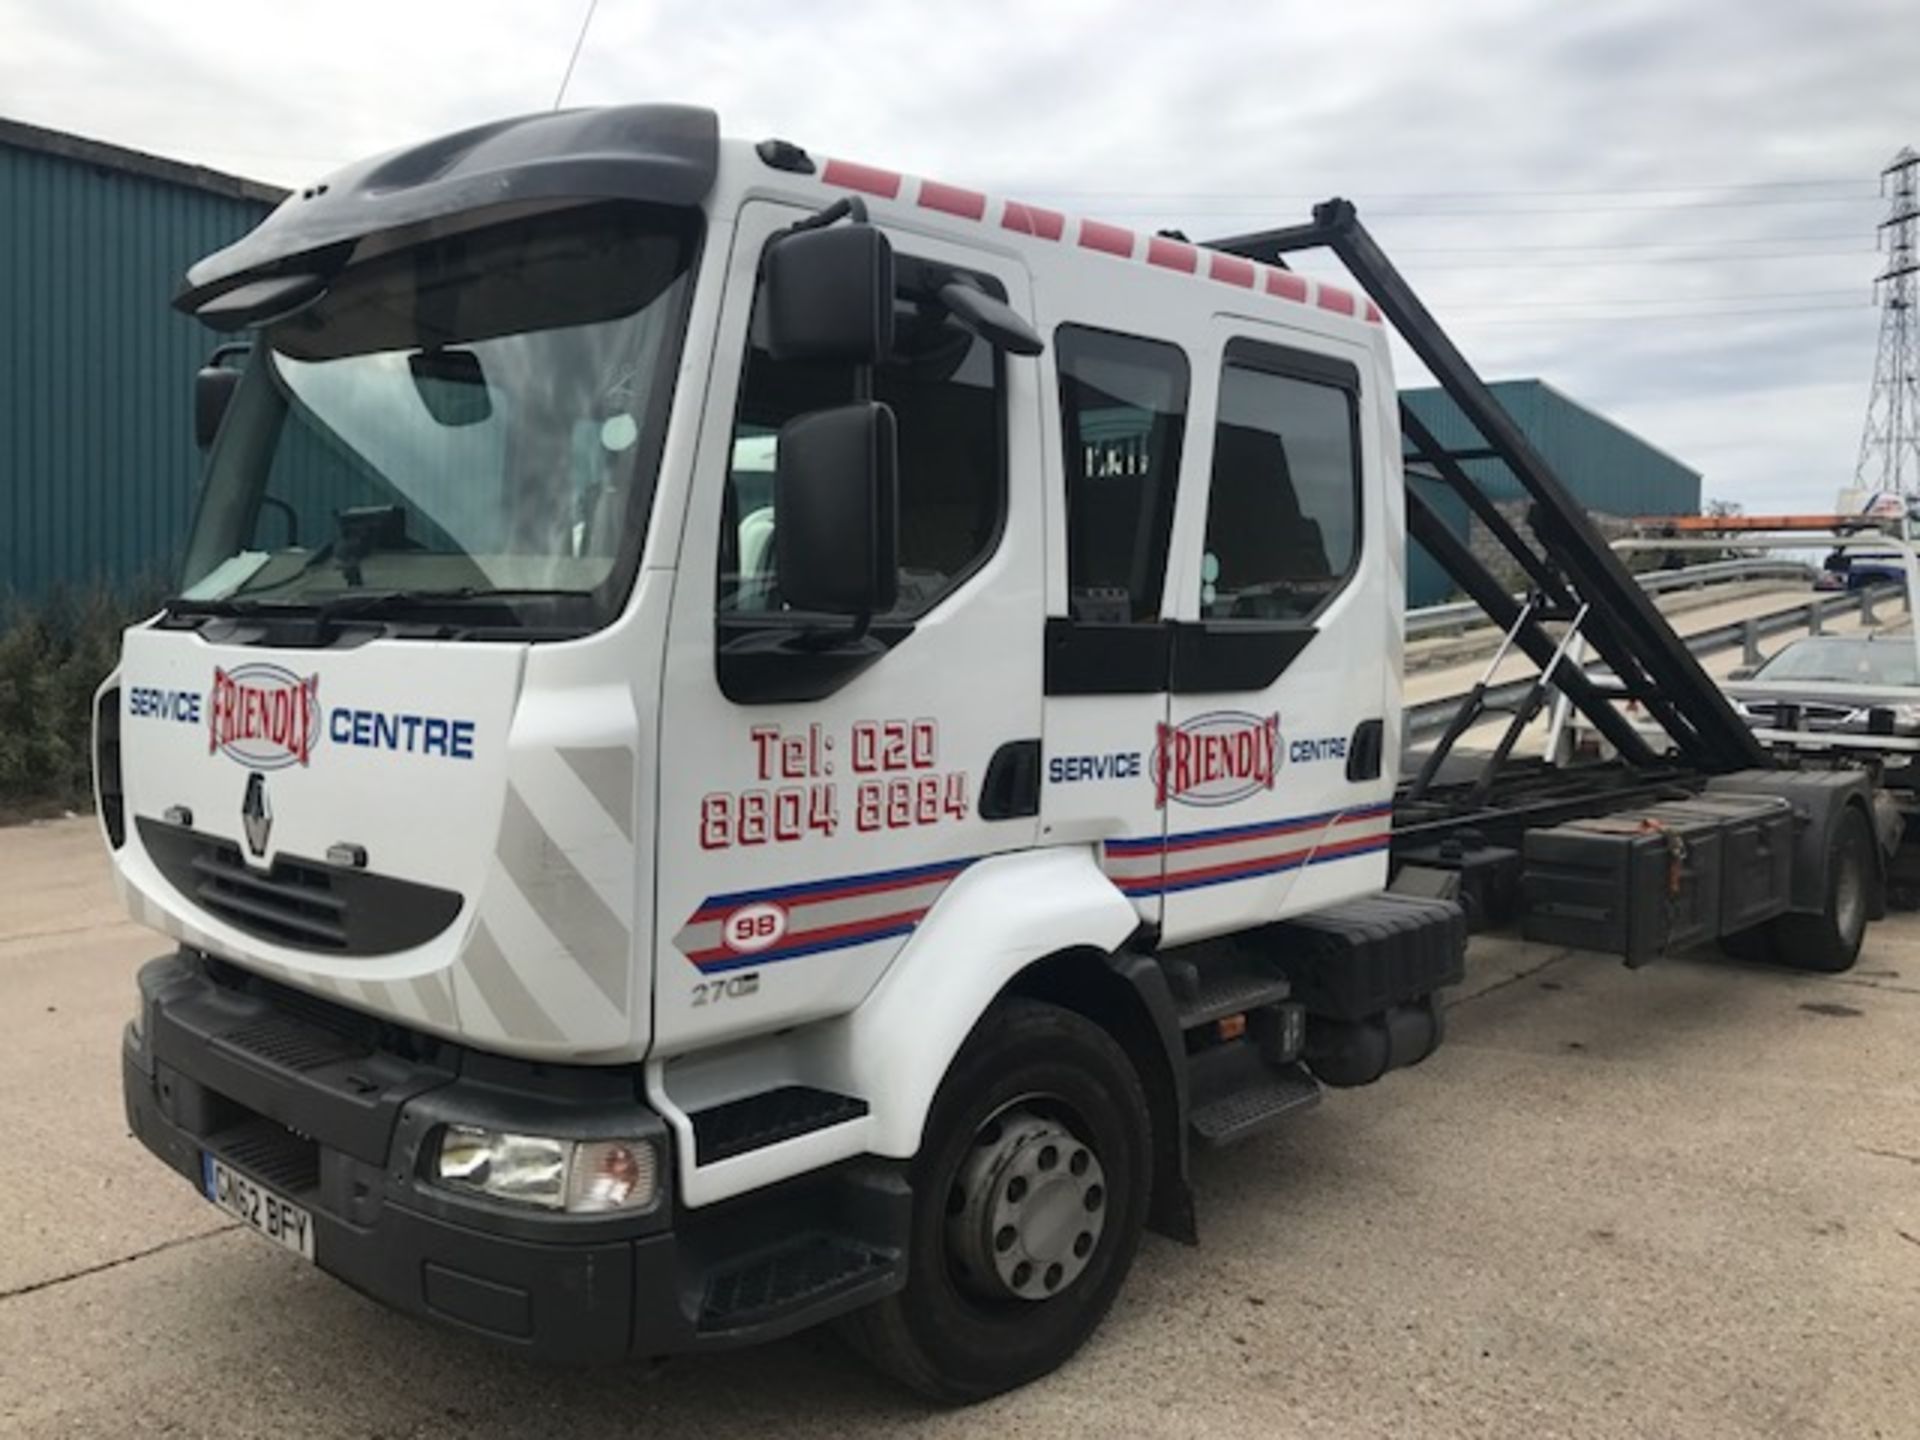 2013 Renault Midlum 270 DXI 16T crew cab tilt and slide breakdown recovery vehiclecomplete with - Image 3 of 18